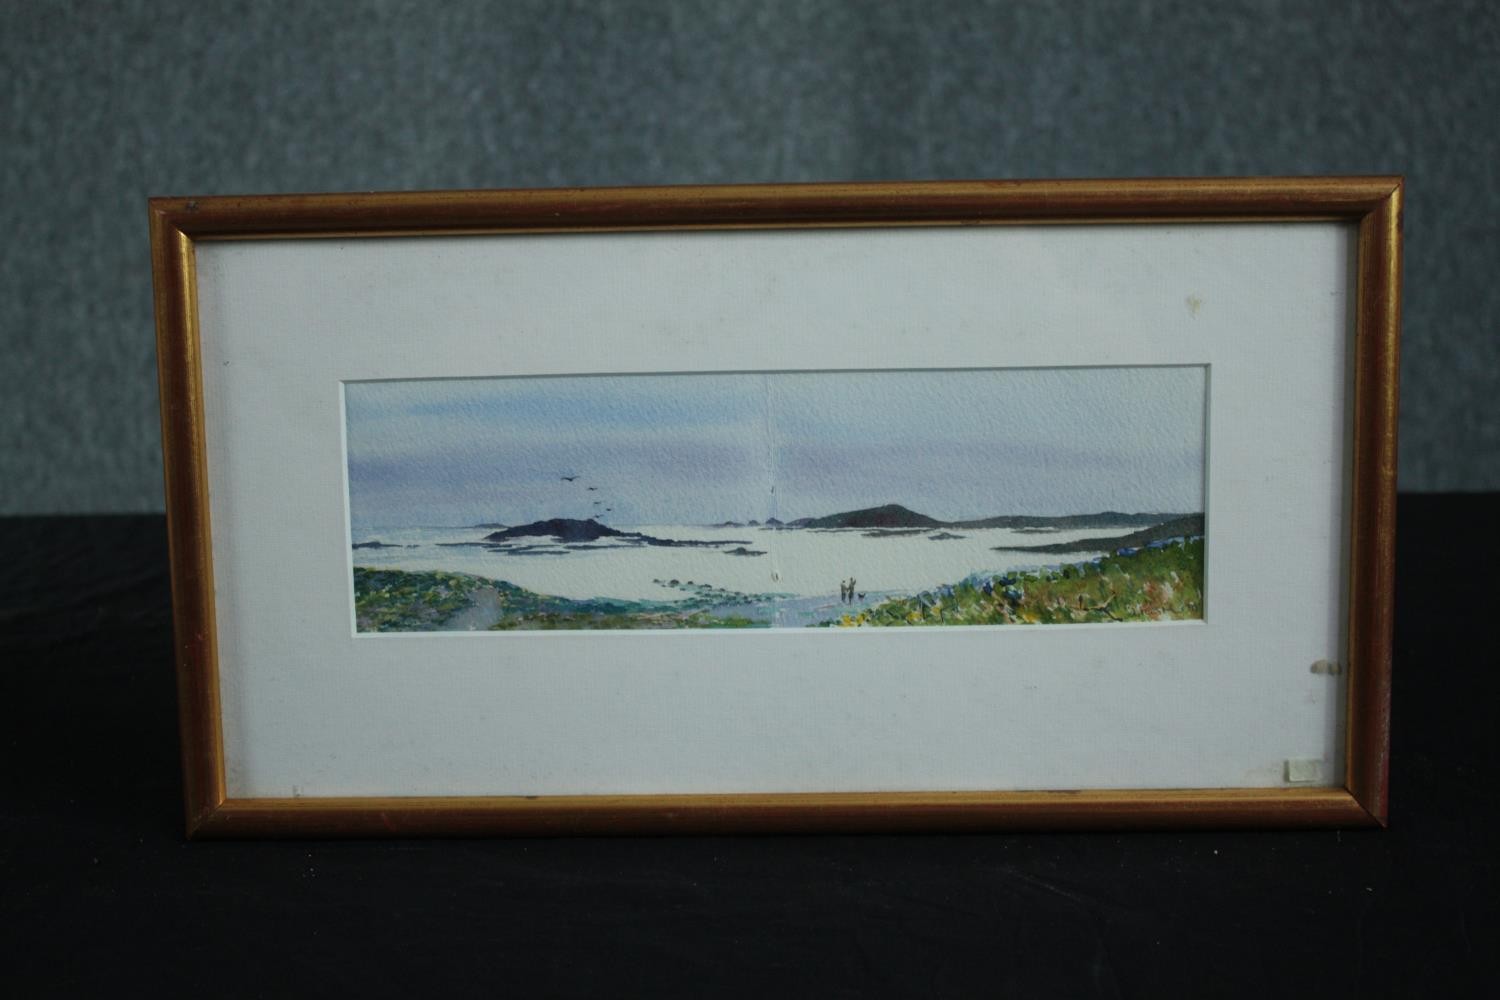 Watercolour. Scilly Isles. Signed on the back 'L. M. Minter' and from the 'Hurlingham Club Members - Image 2 of 5